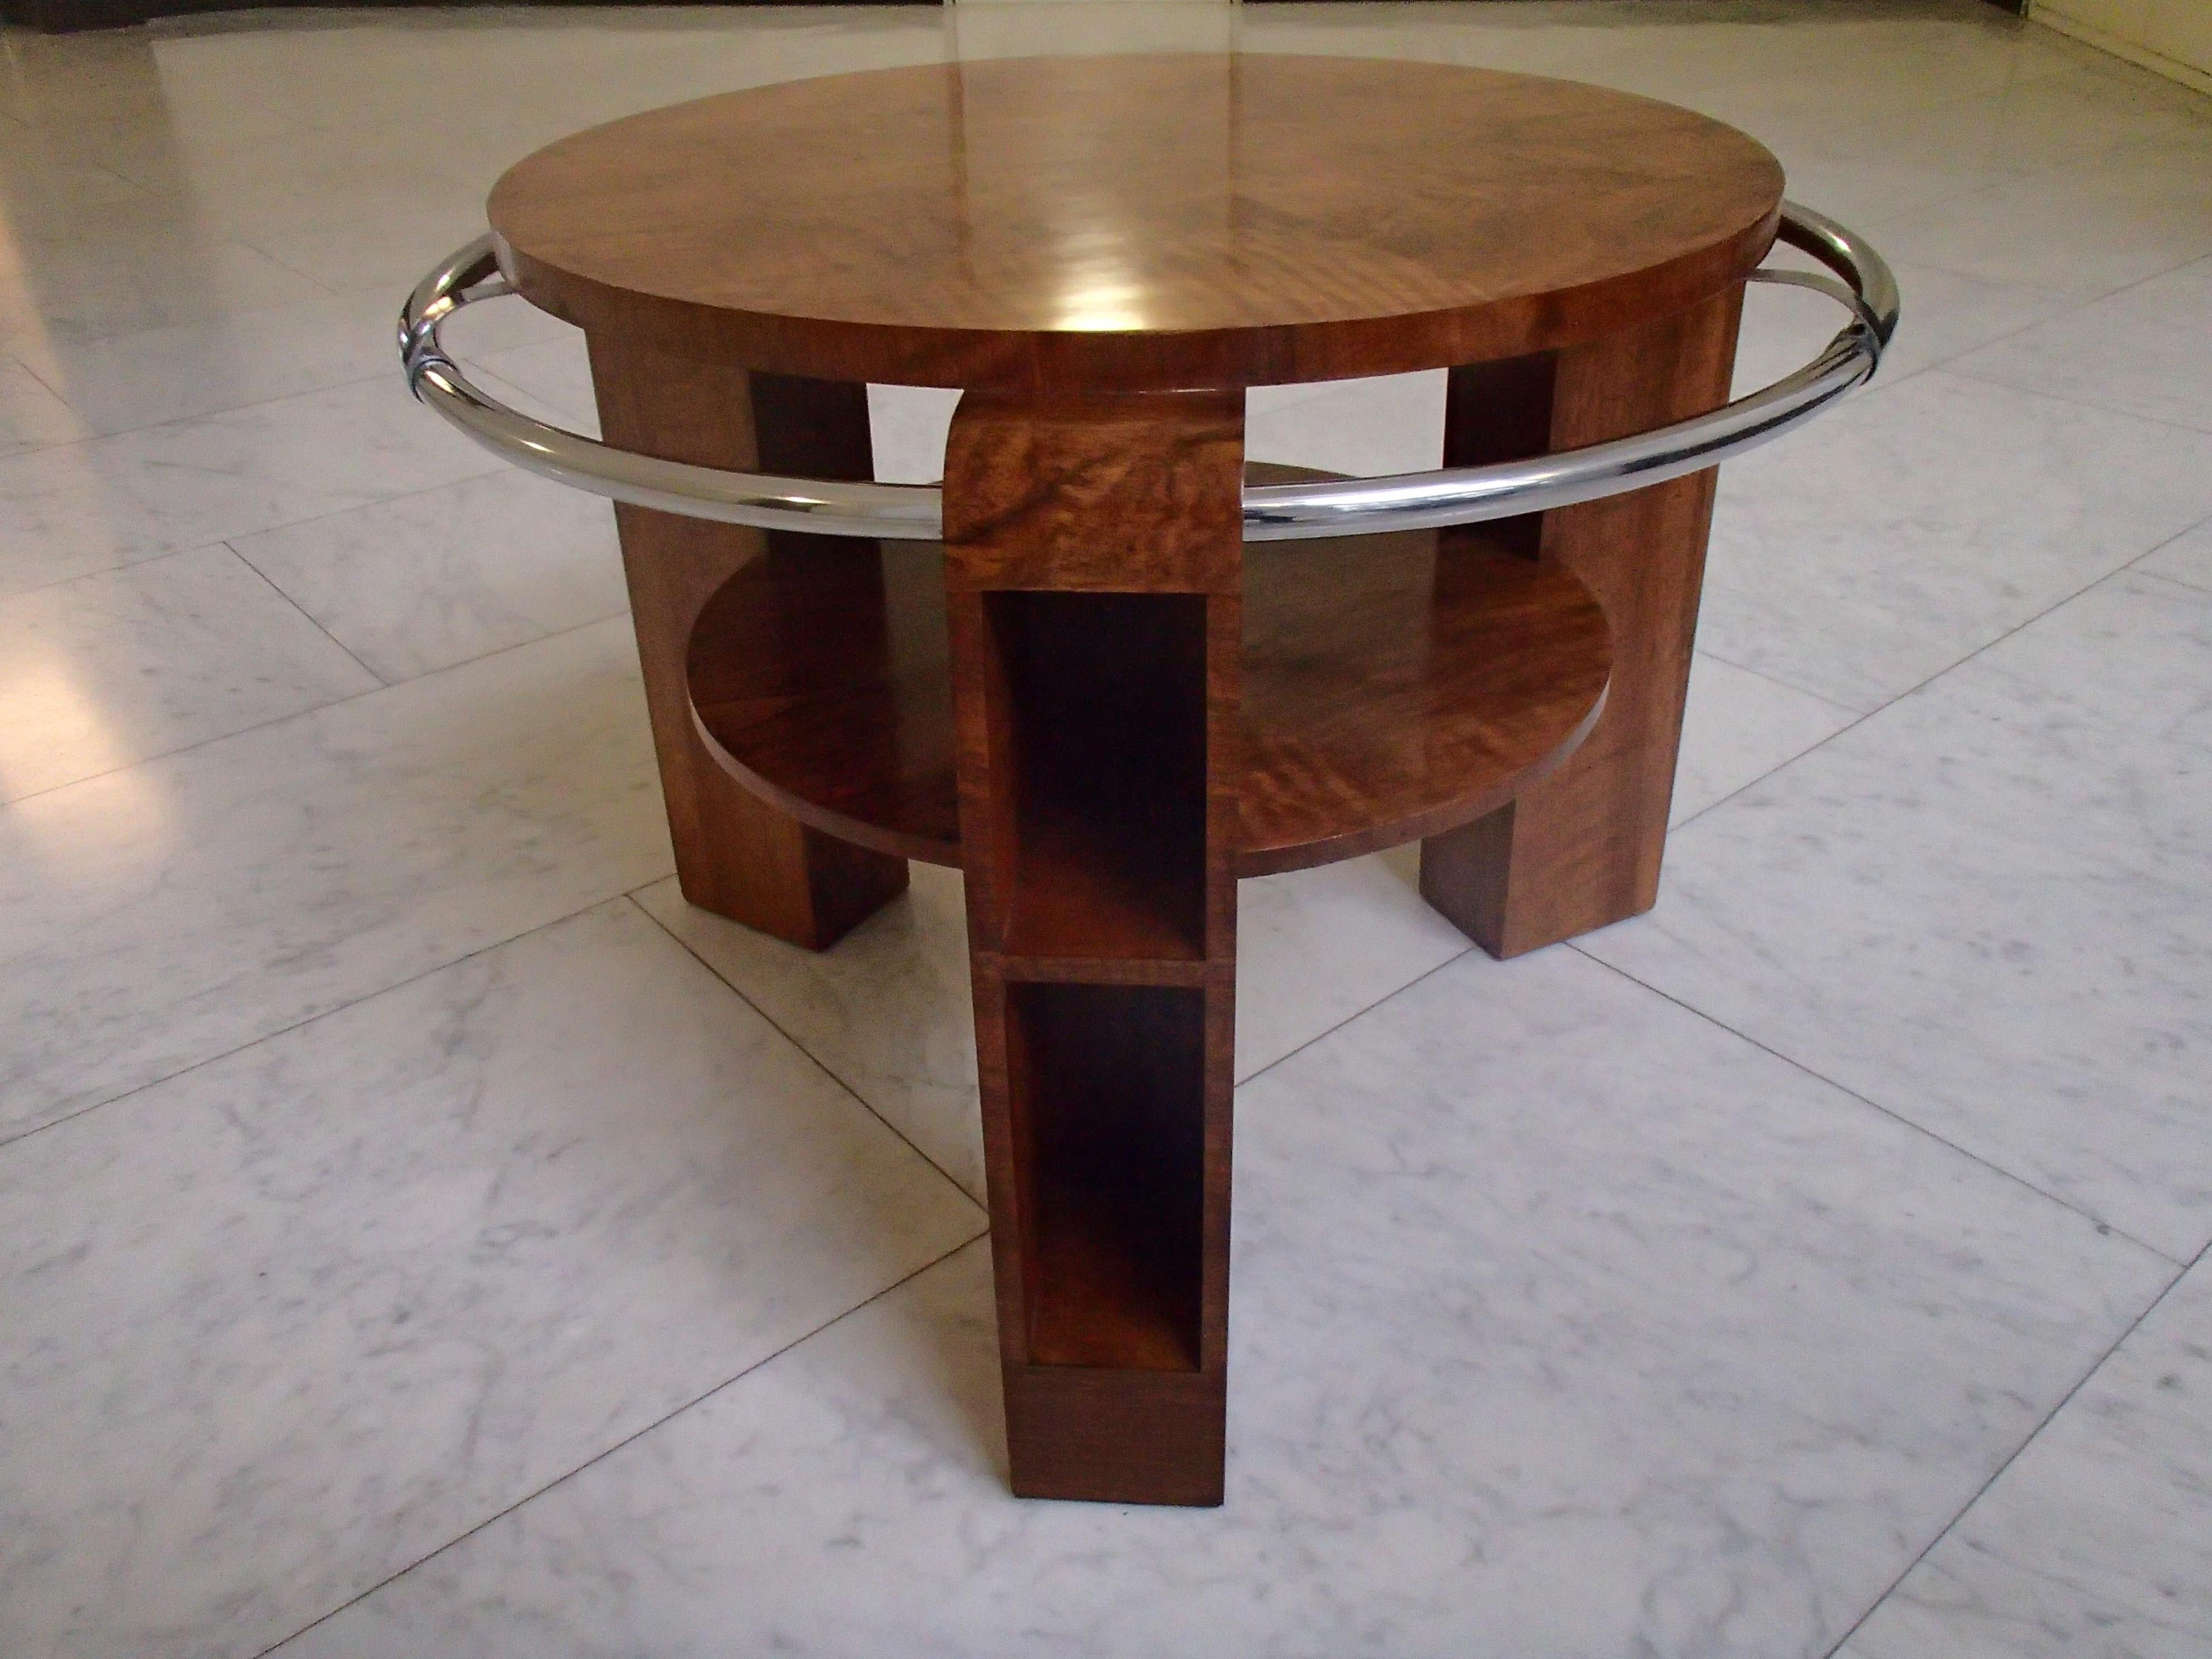 Art Deco Coffee or Sofa Table Walnut with Chrome Ring and Shelf's in the Legs 4